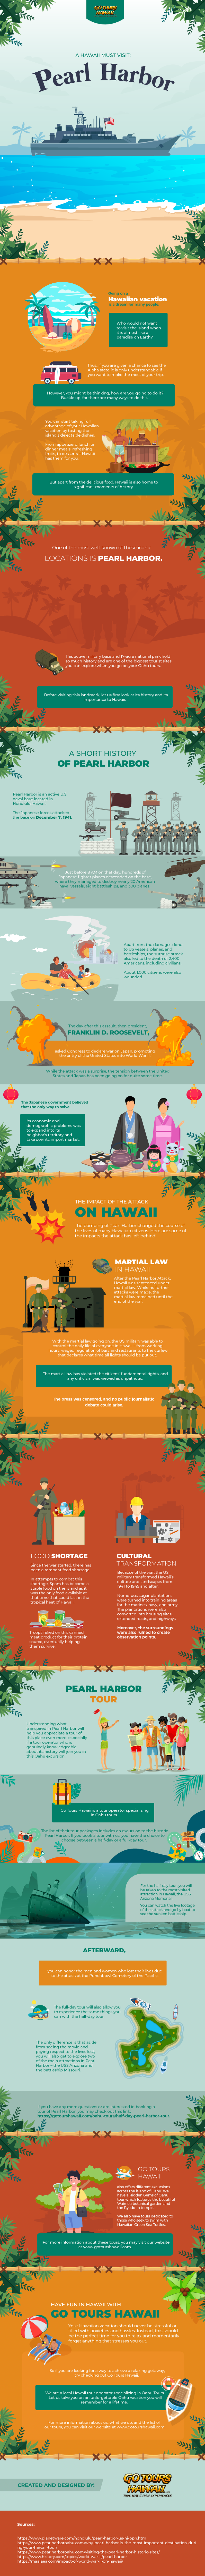 Hawaii-Tourist-Spot-Welcome-to-Pearl-Harbor-infographic-image-HFDA62